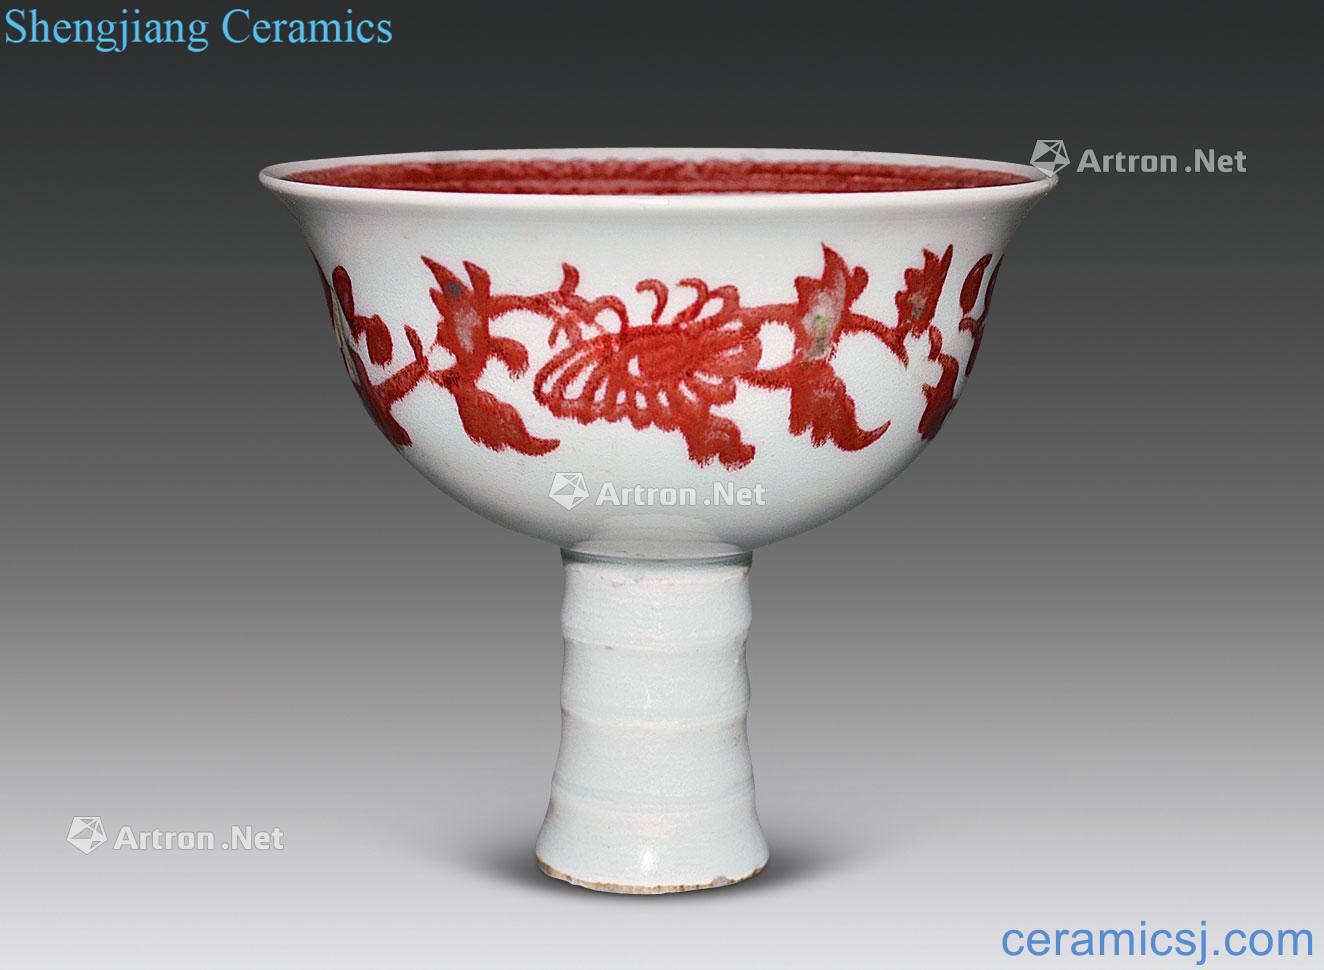 The yuan dynasty Youligong flower footed bowl